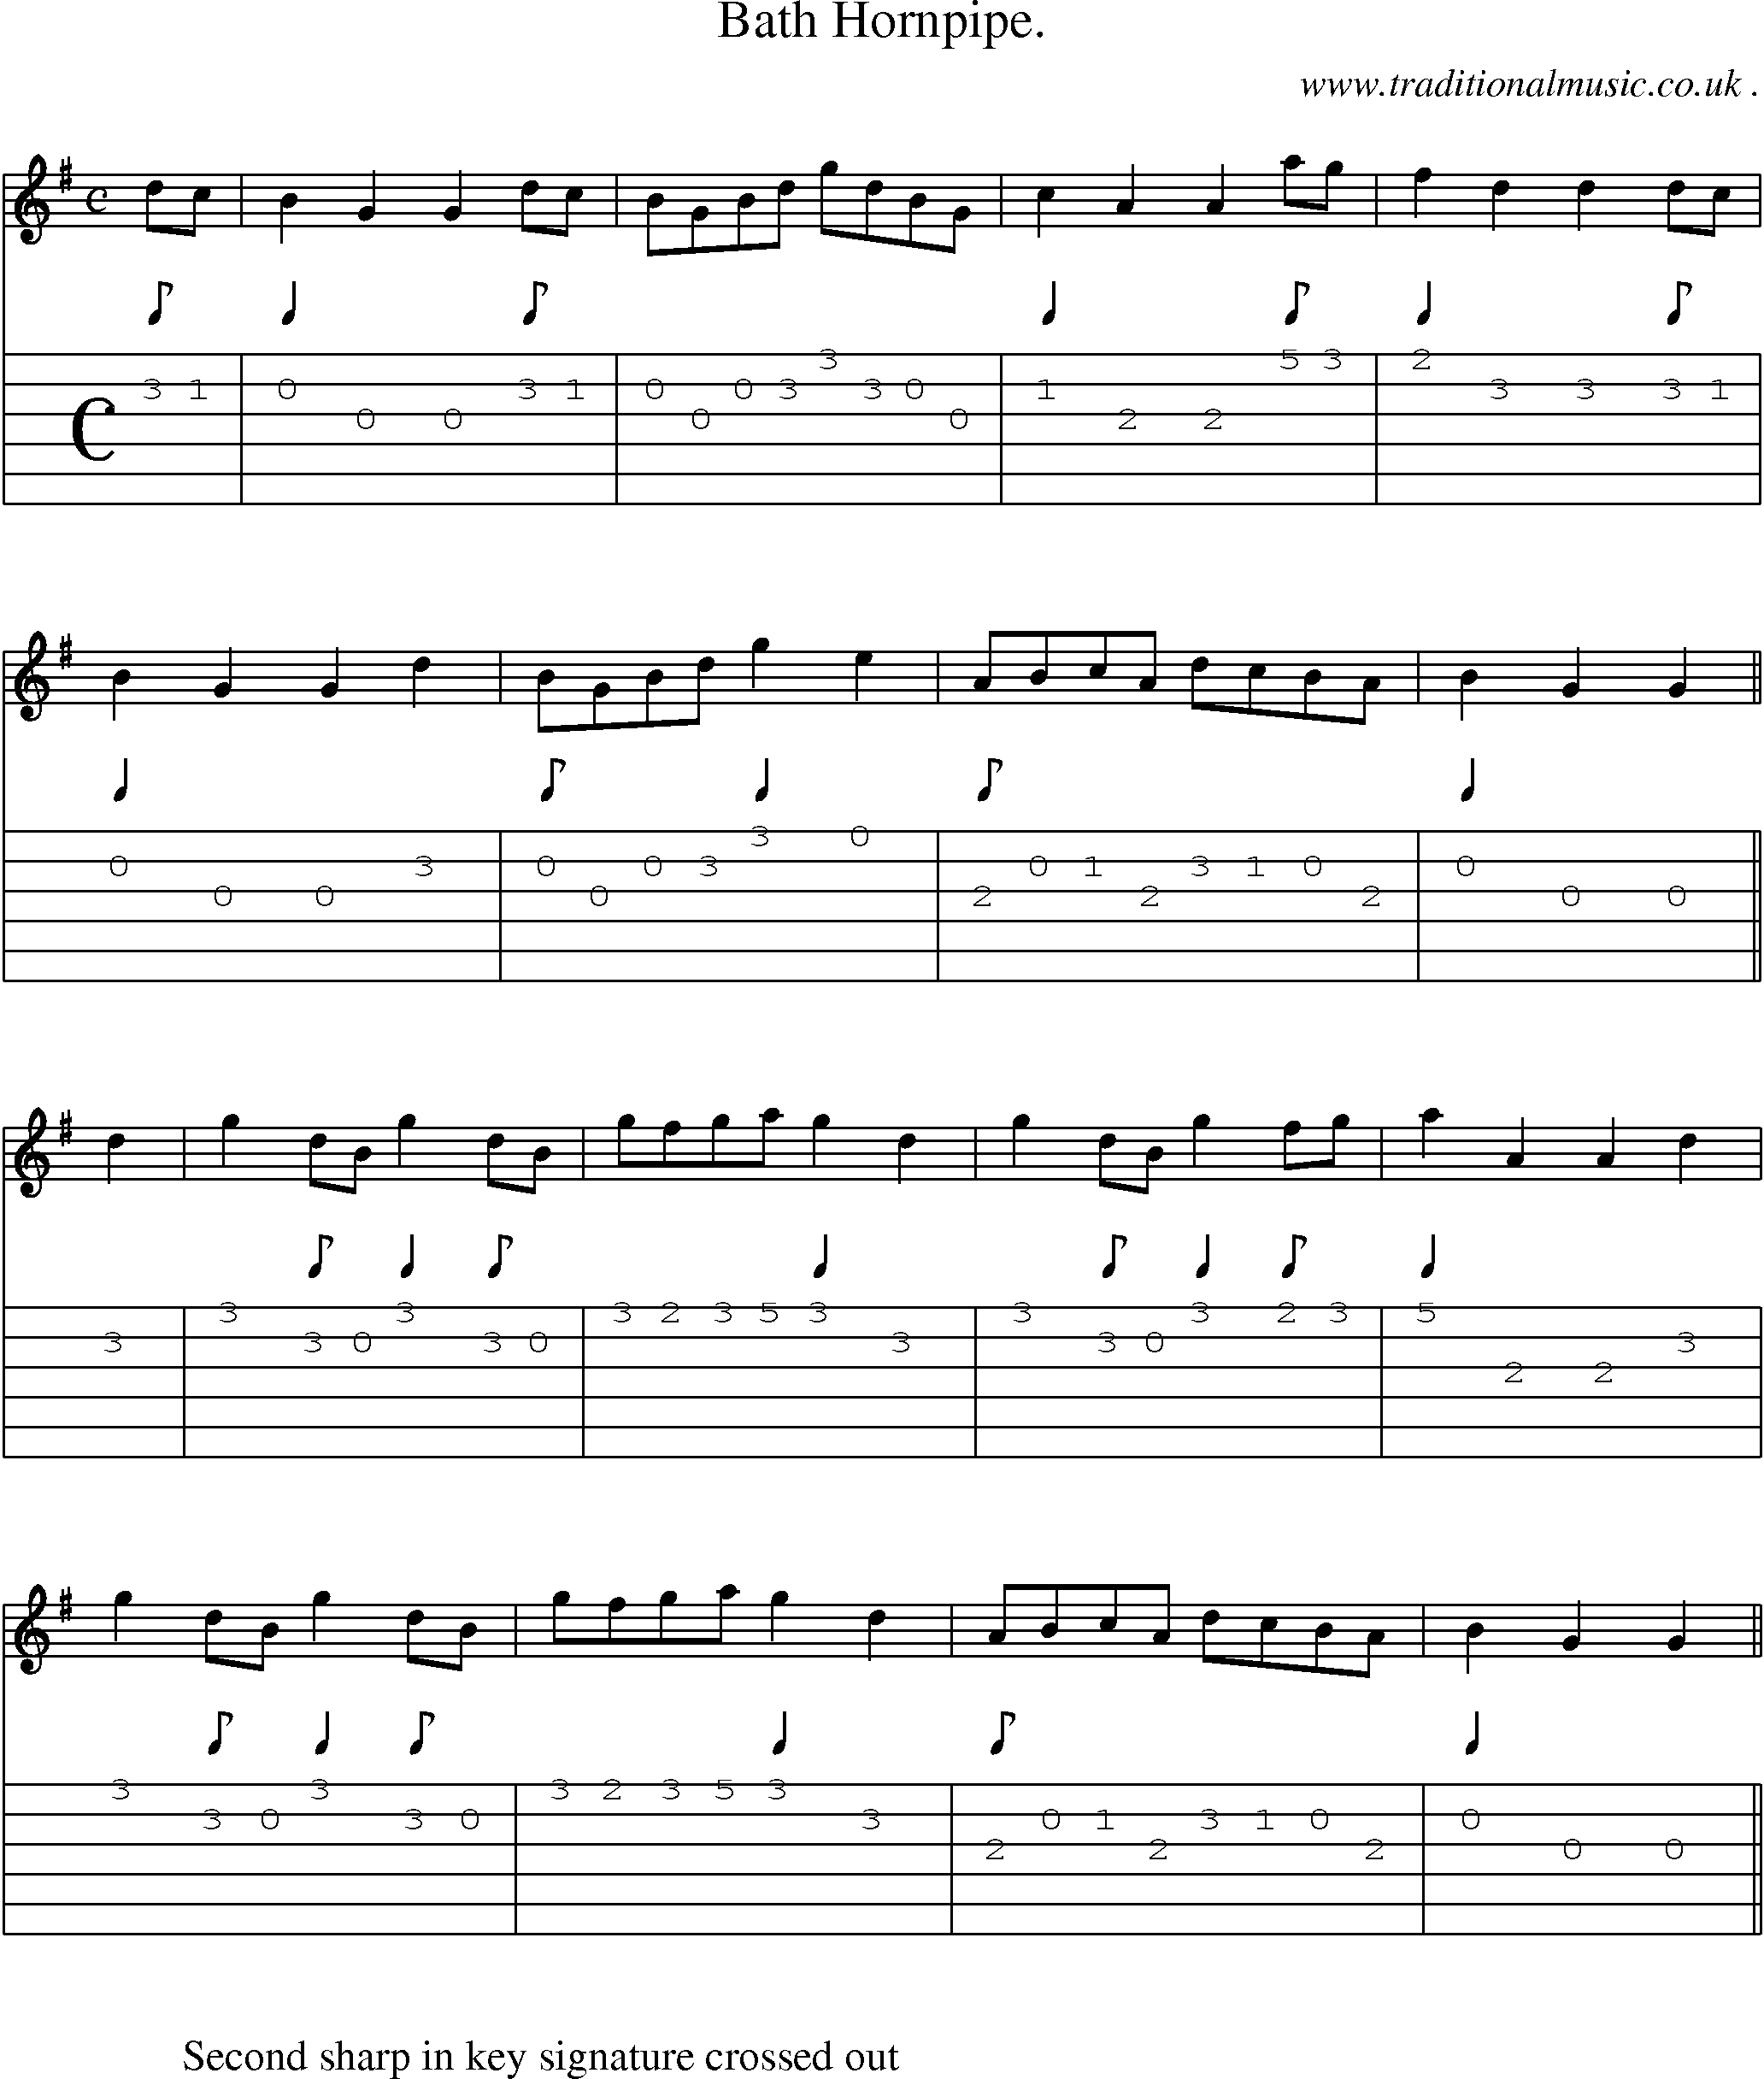 Sheet-Music and Guitar Tabs for Bath Hornpipe